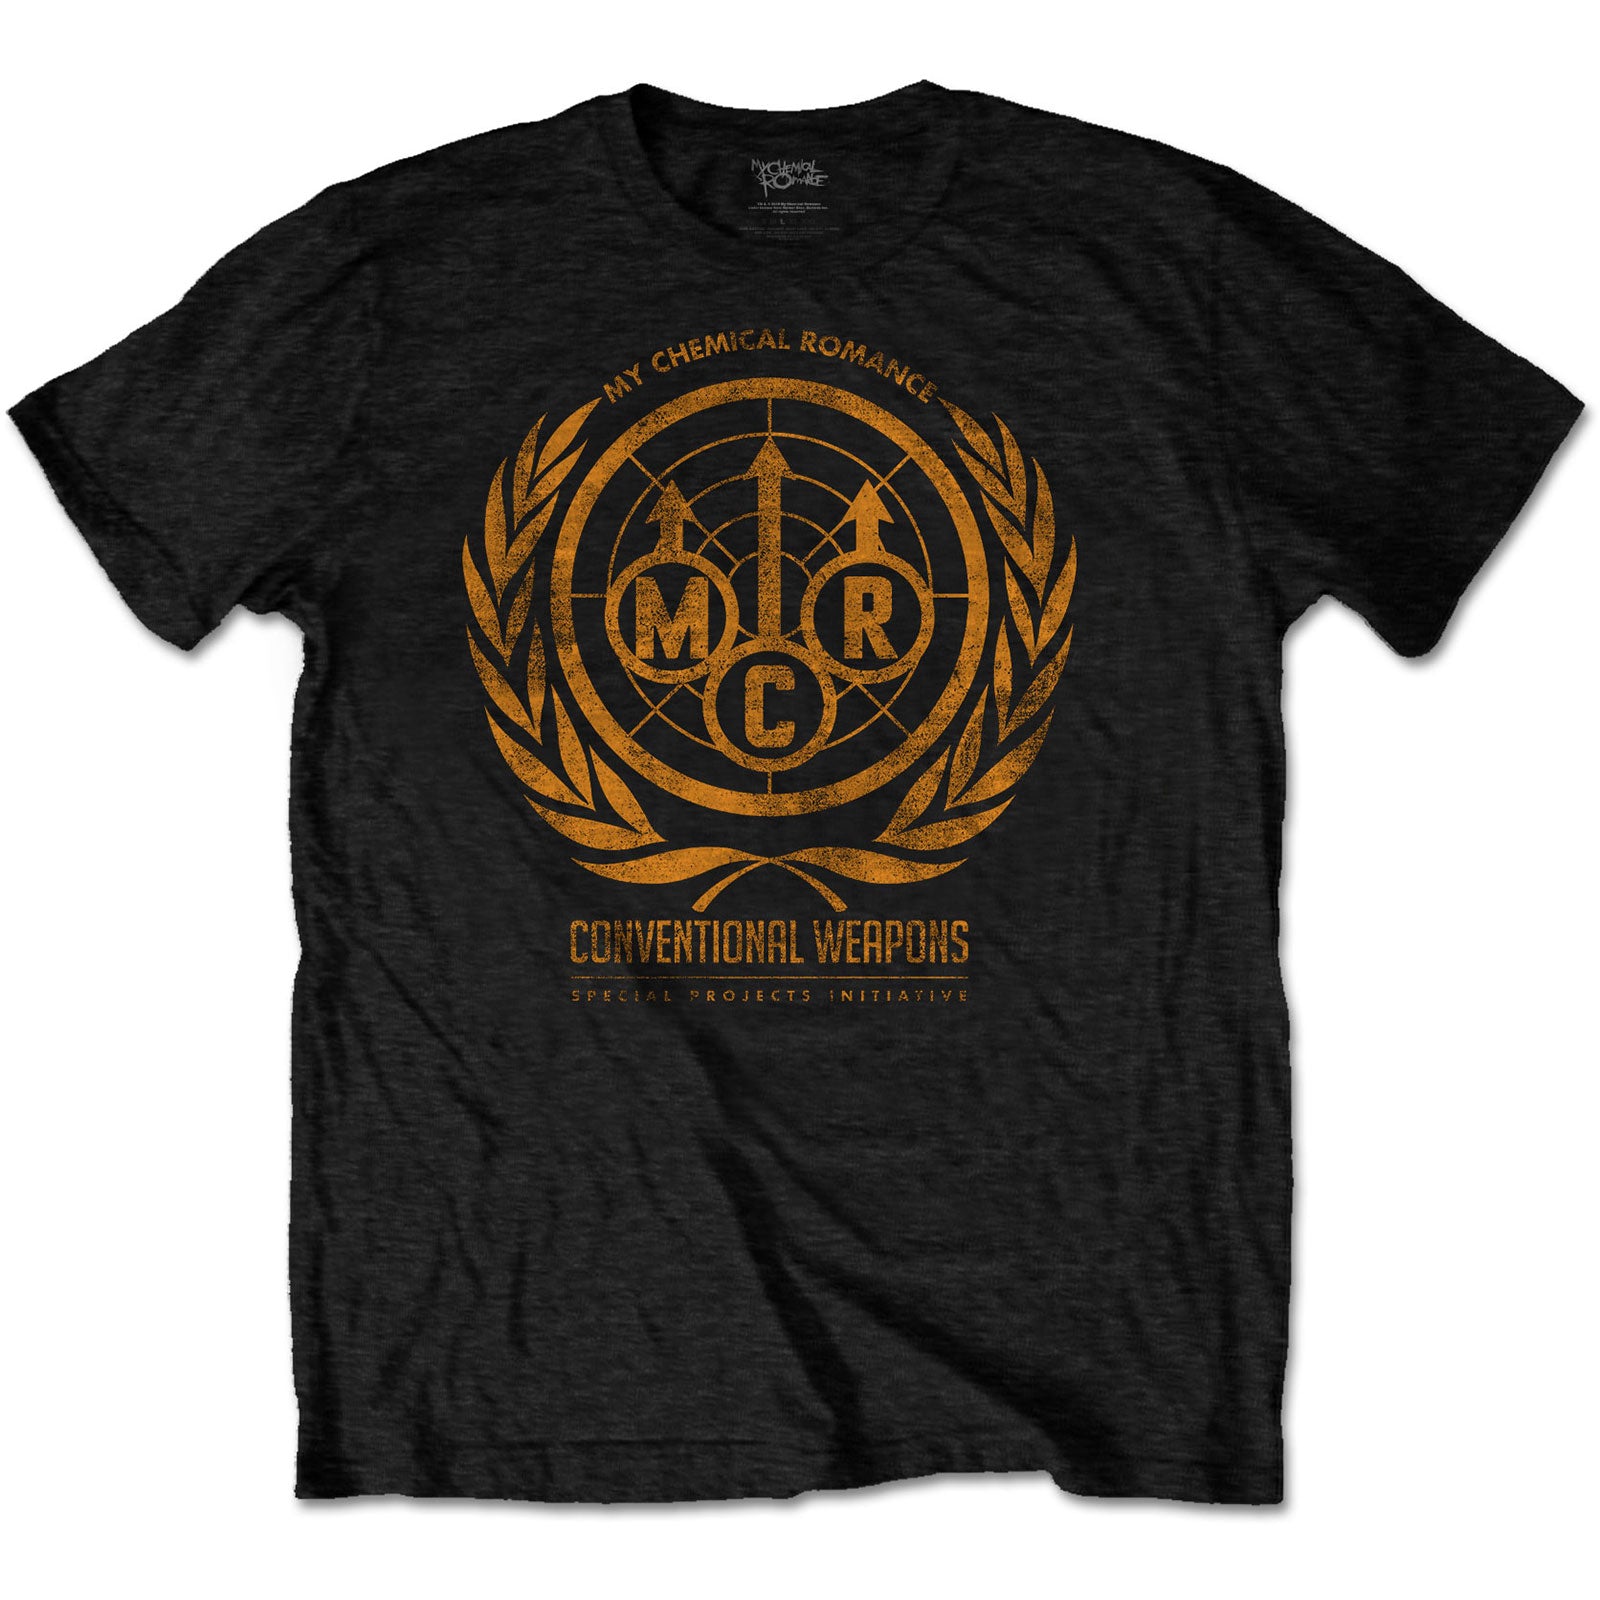 My Chemical Romance Unisex T-Shirt: Conventional Weapons